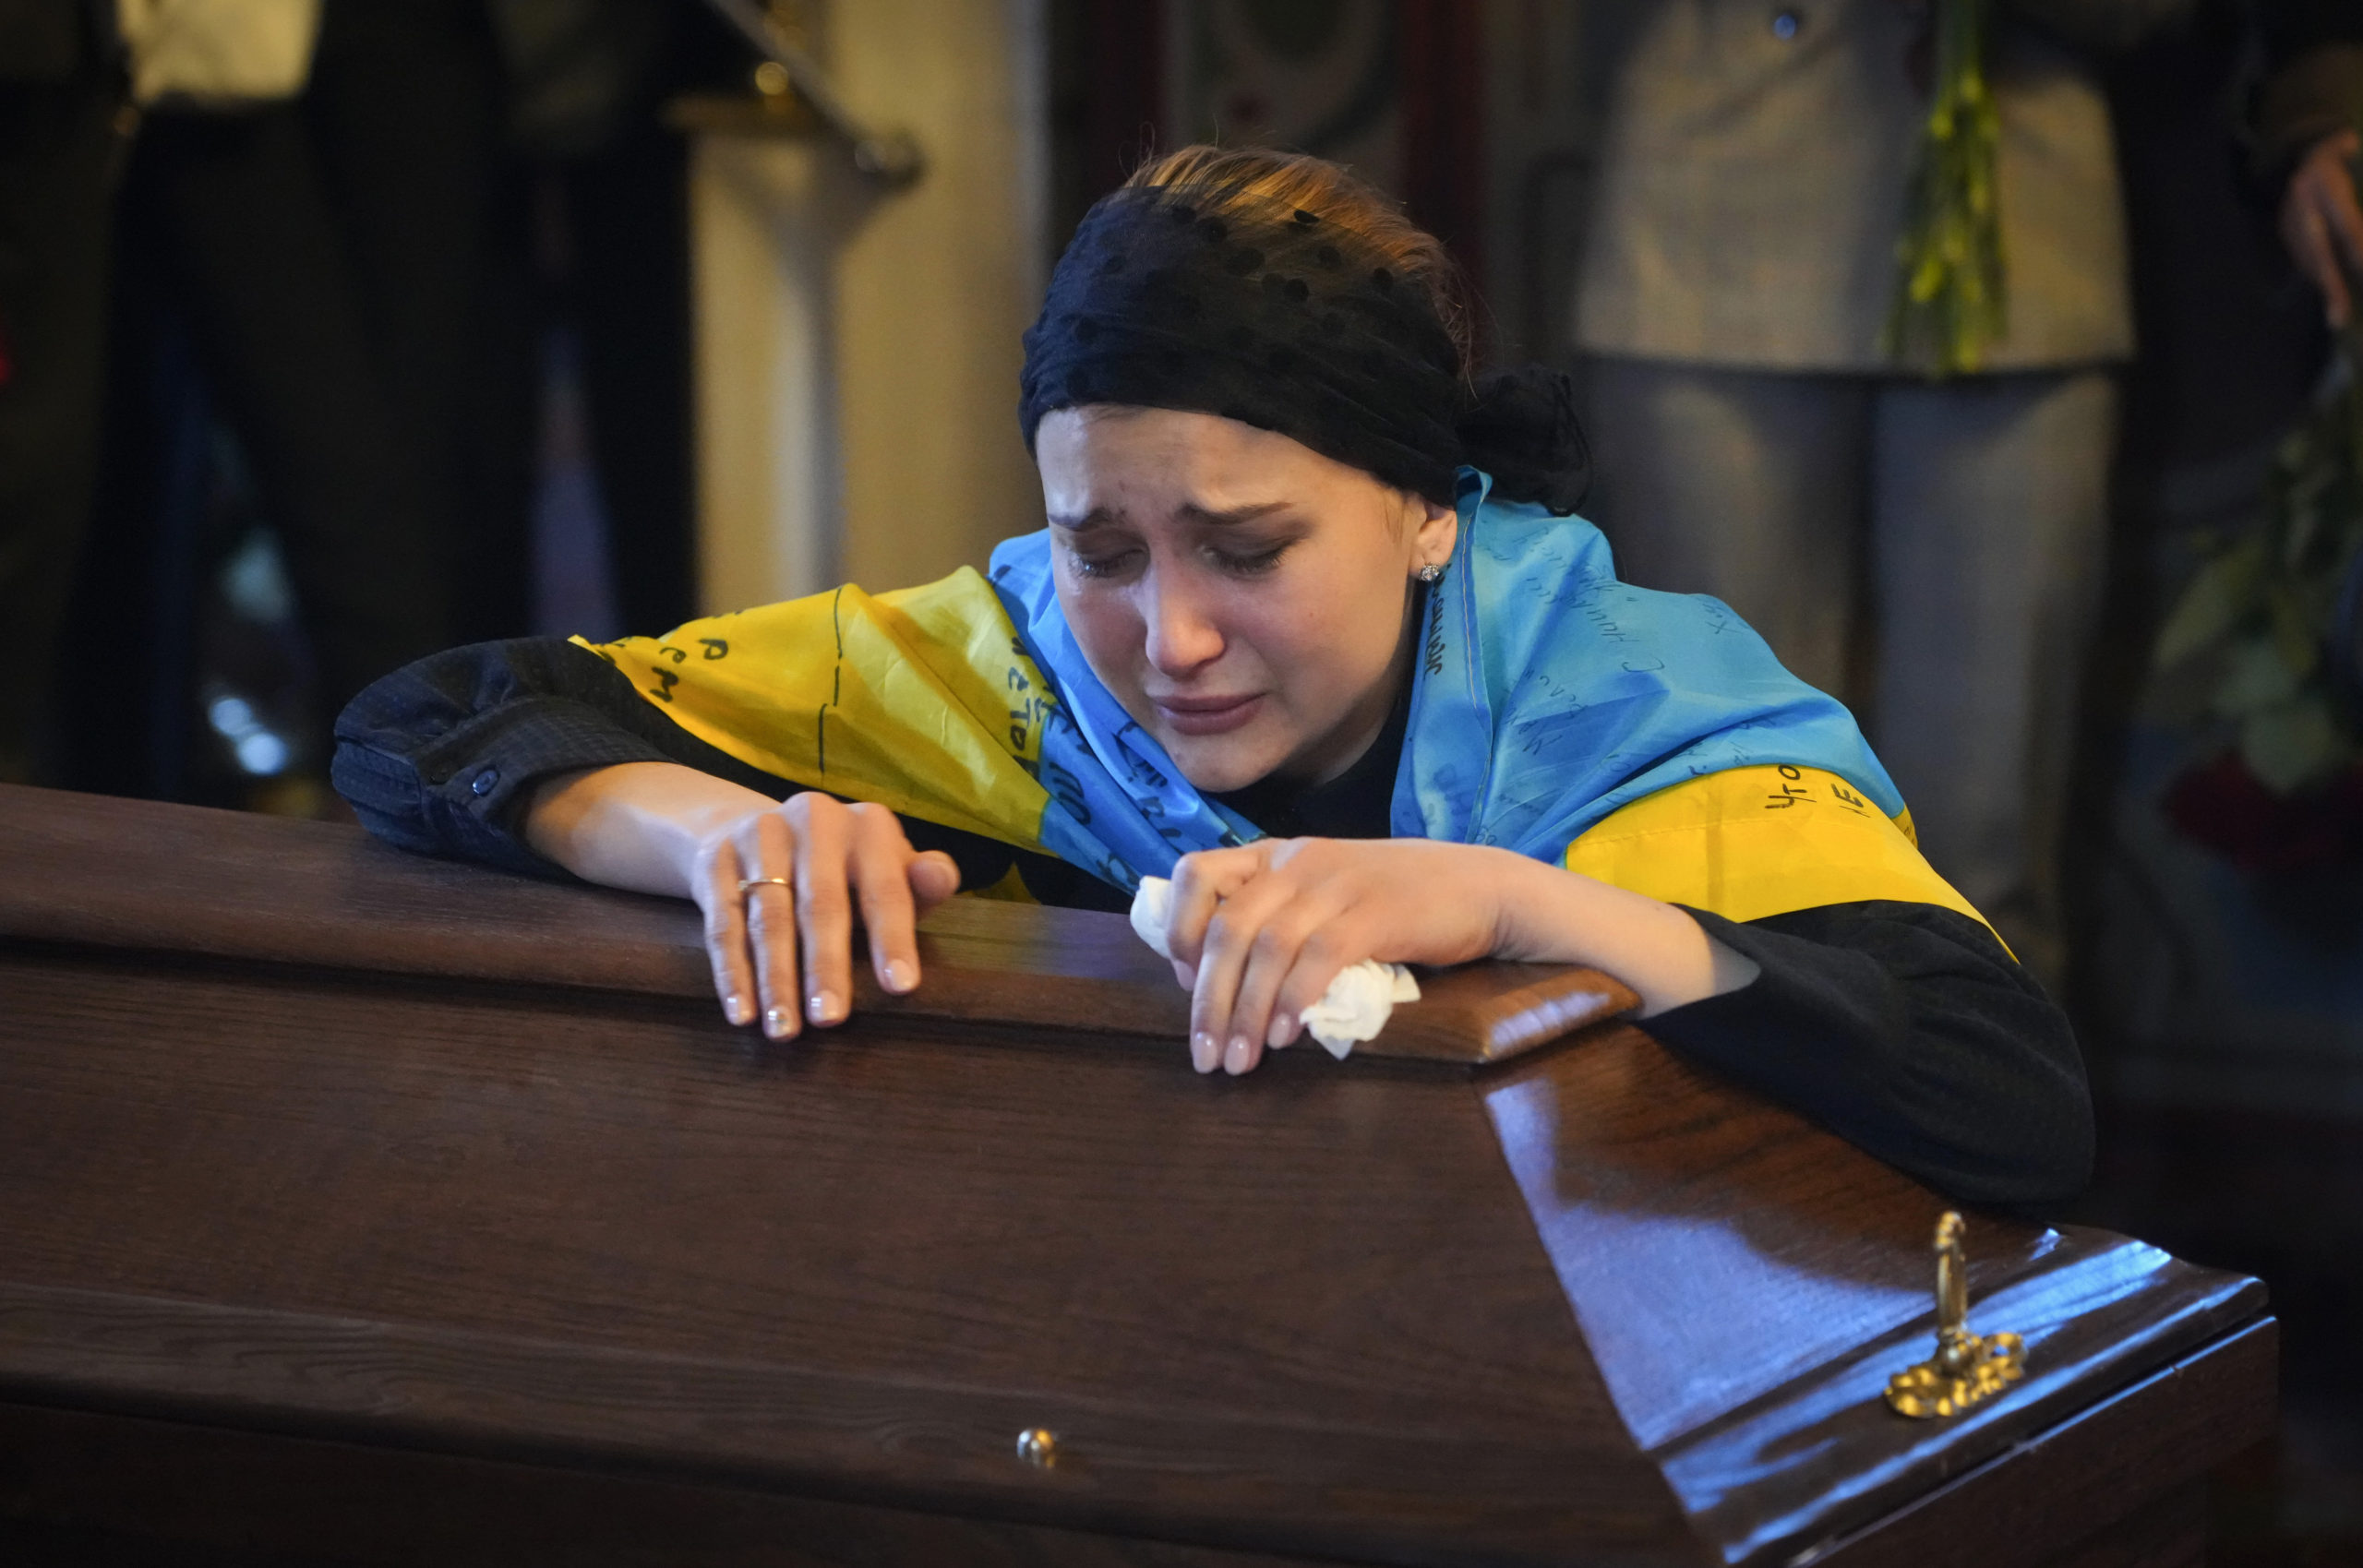 The widow of Ukrainian journalist and volunteer soldier Oleksandr Makhov cries over his coffin at St. Michael cathedral in Kyiv, Ukraine, on May 9.